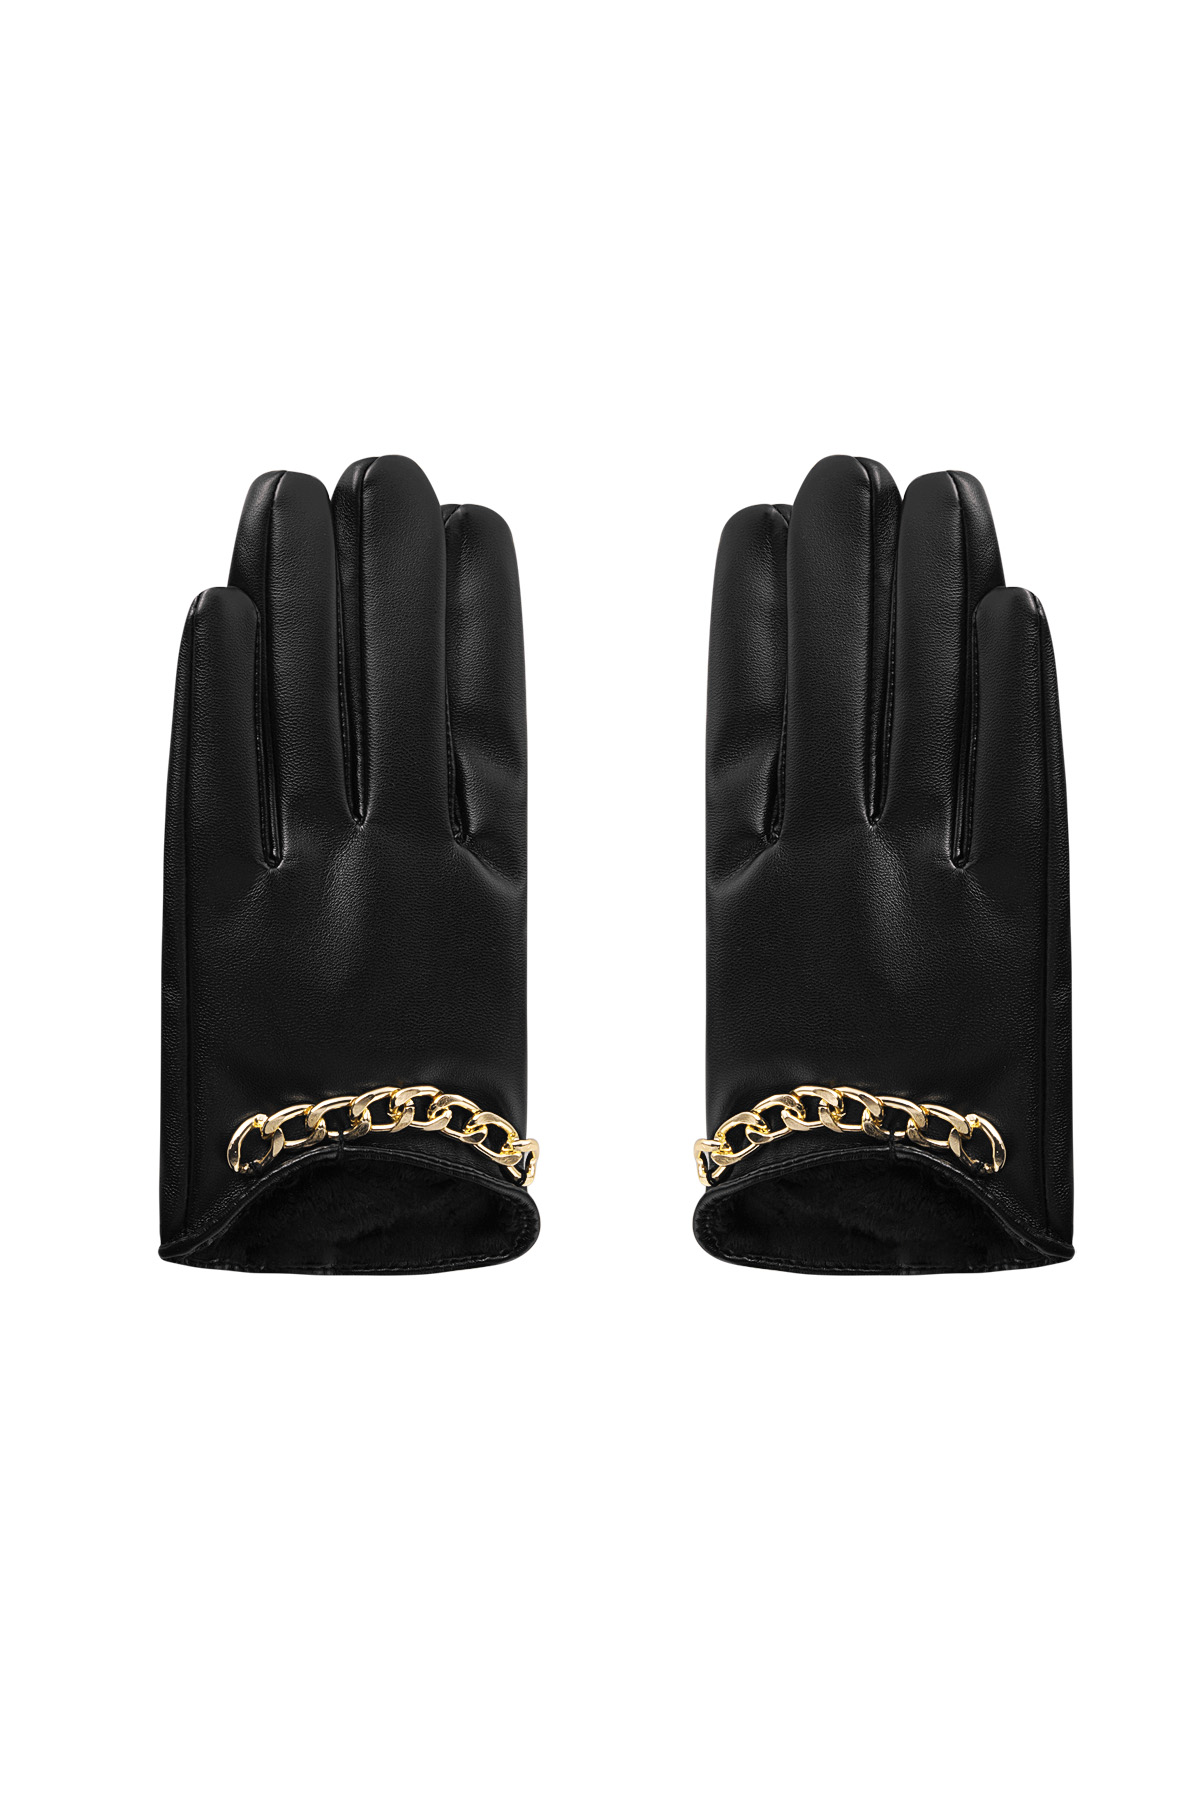 PU gloves with small chain - black